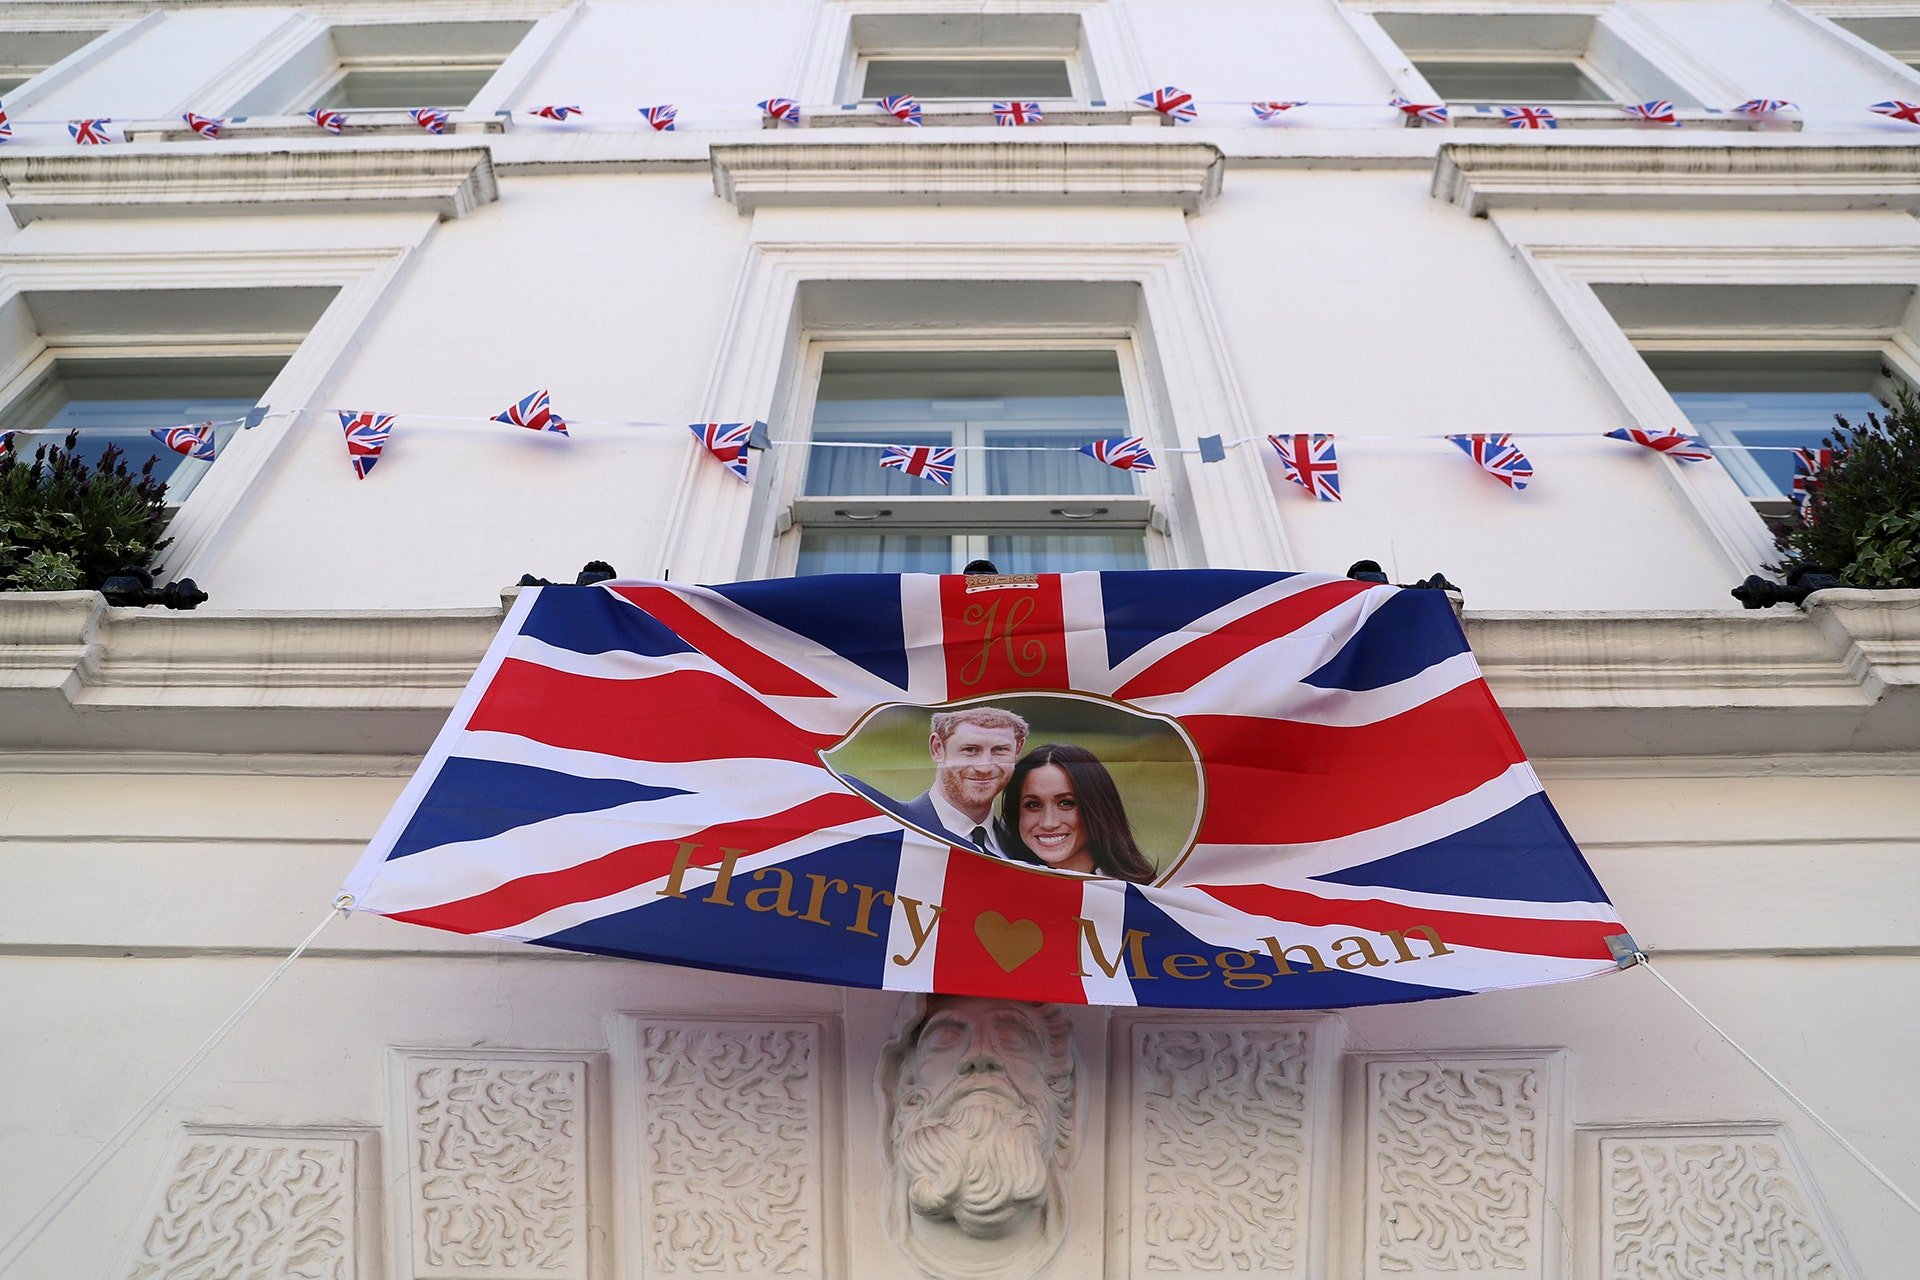 In Pictures: Royal wedding preparations